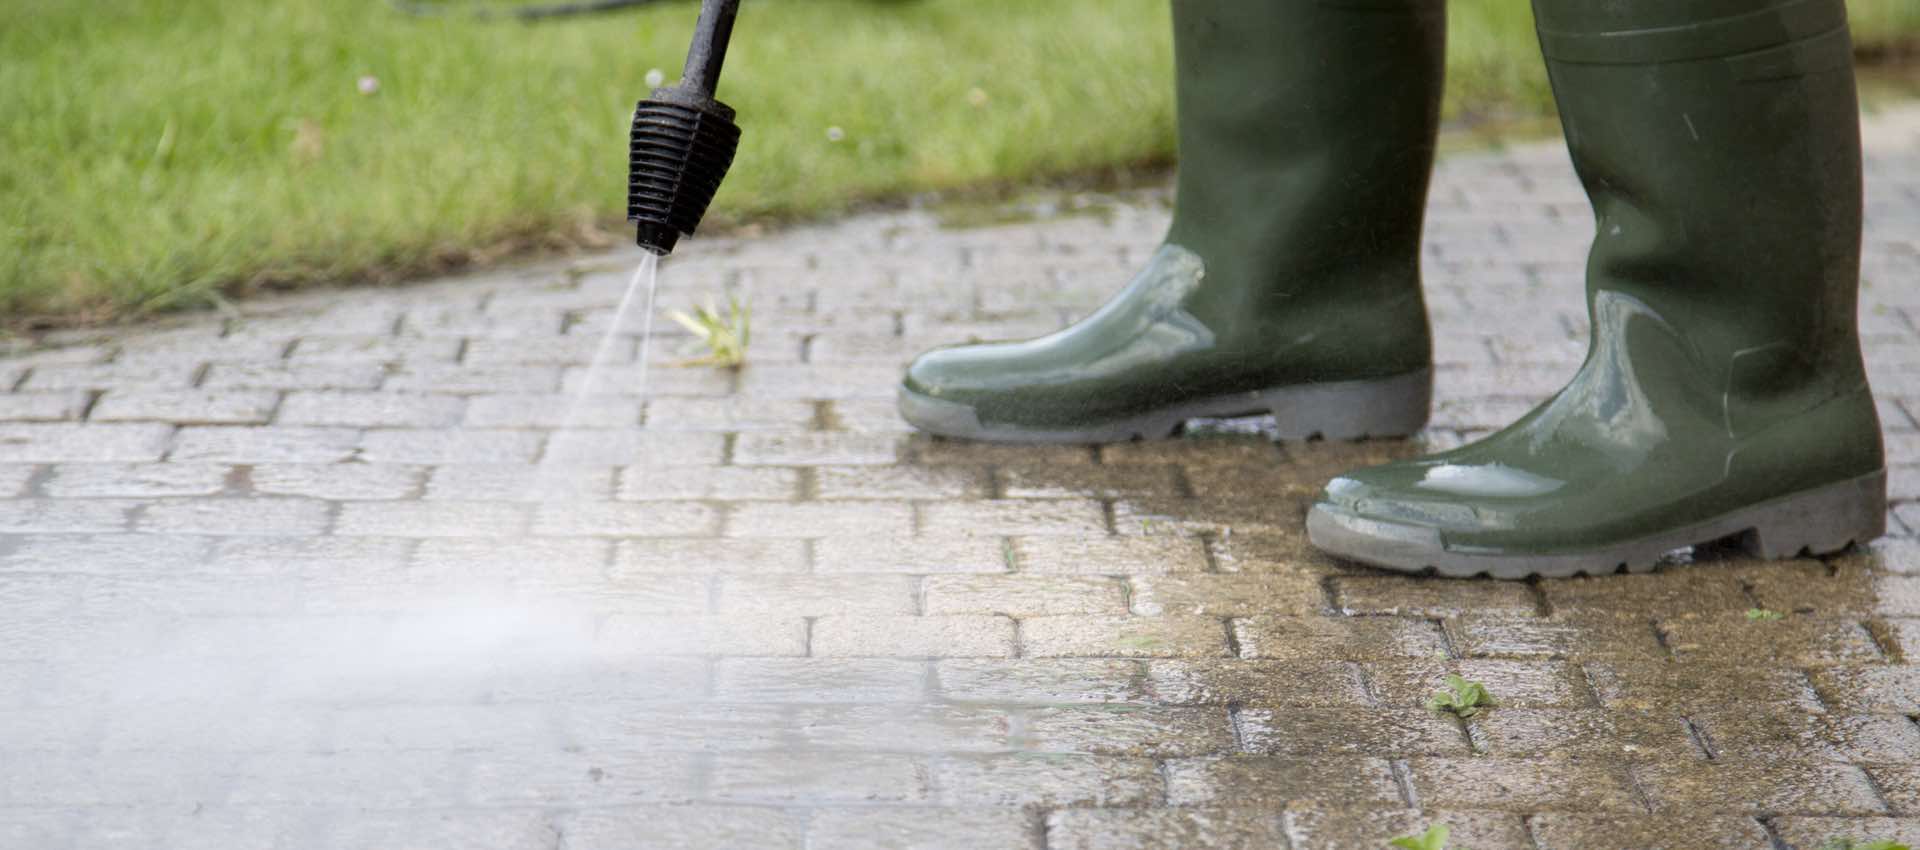 Professional Outdoor Power Washing: Is It Really Necessary?